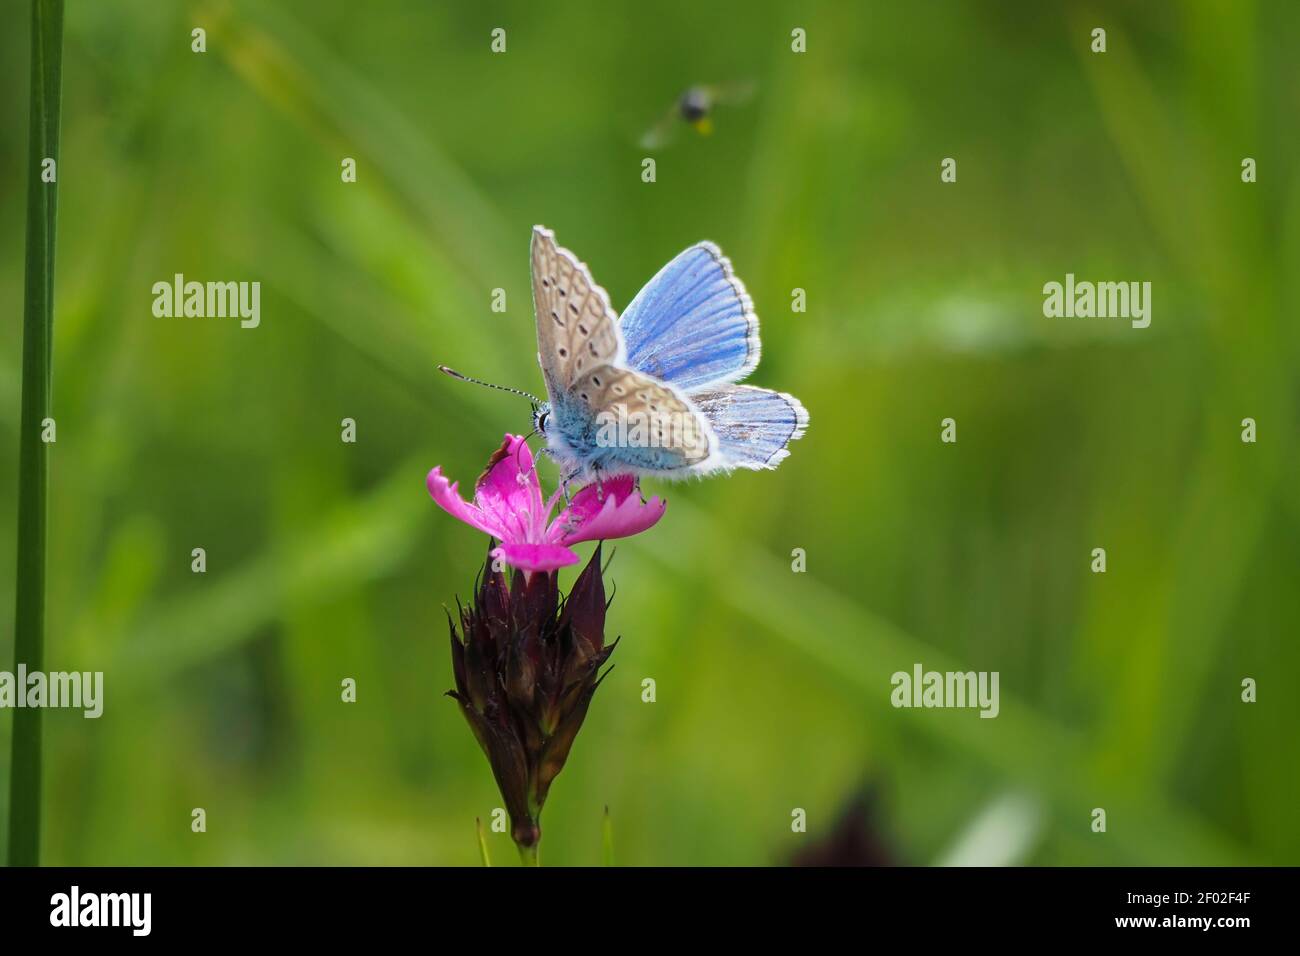 The common blue butterfly (Polyommatus icarus) is a butterfly in the family Lycaenidae and subfamily Polyommatinae. , an intresting photo Stock Photo